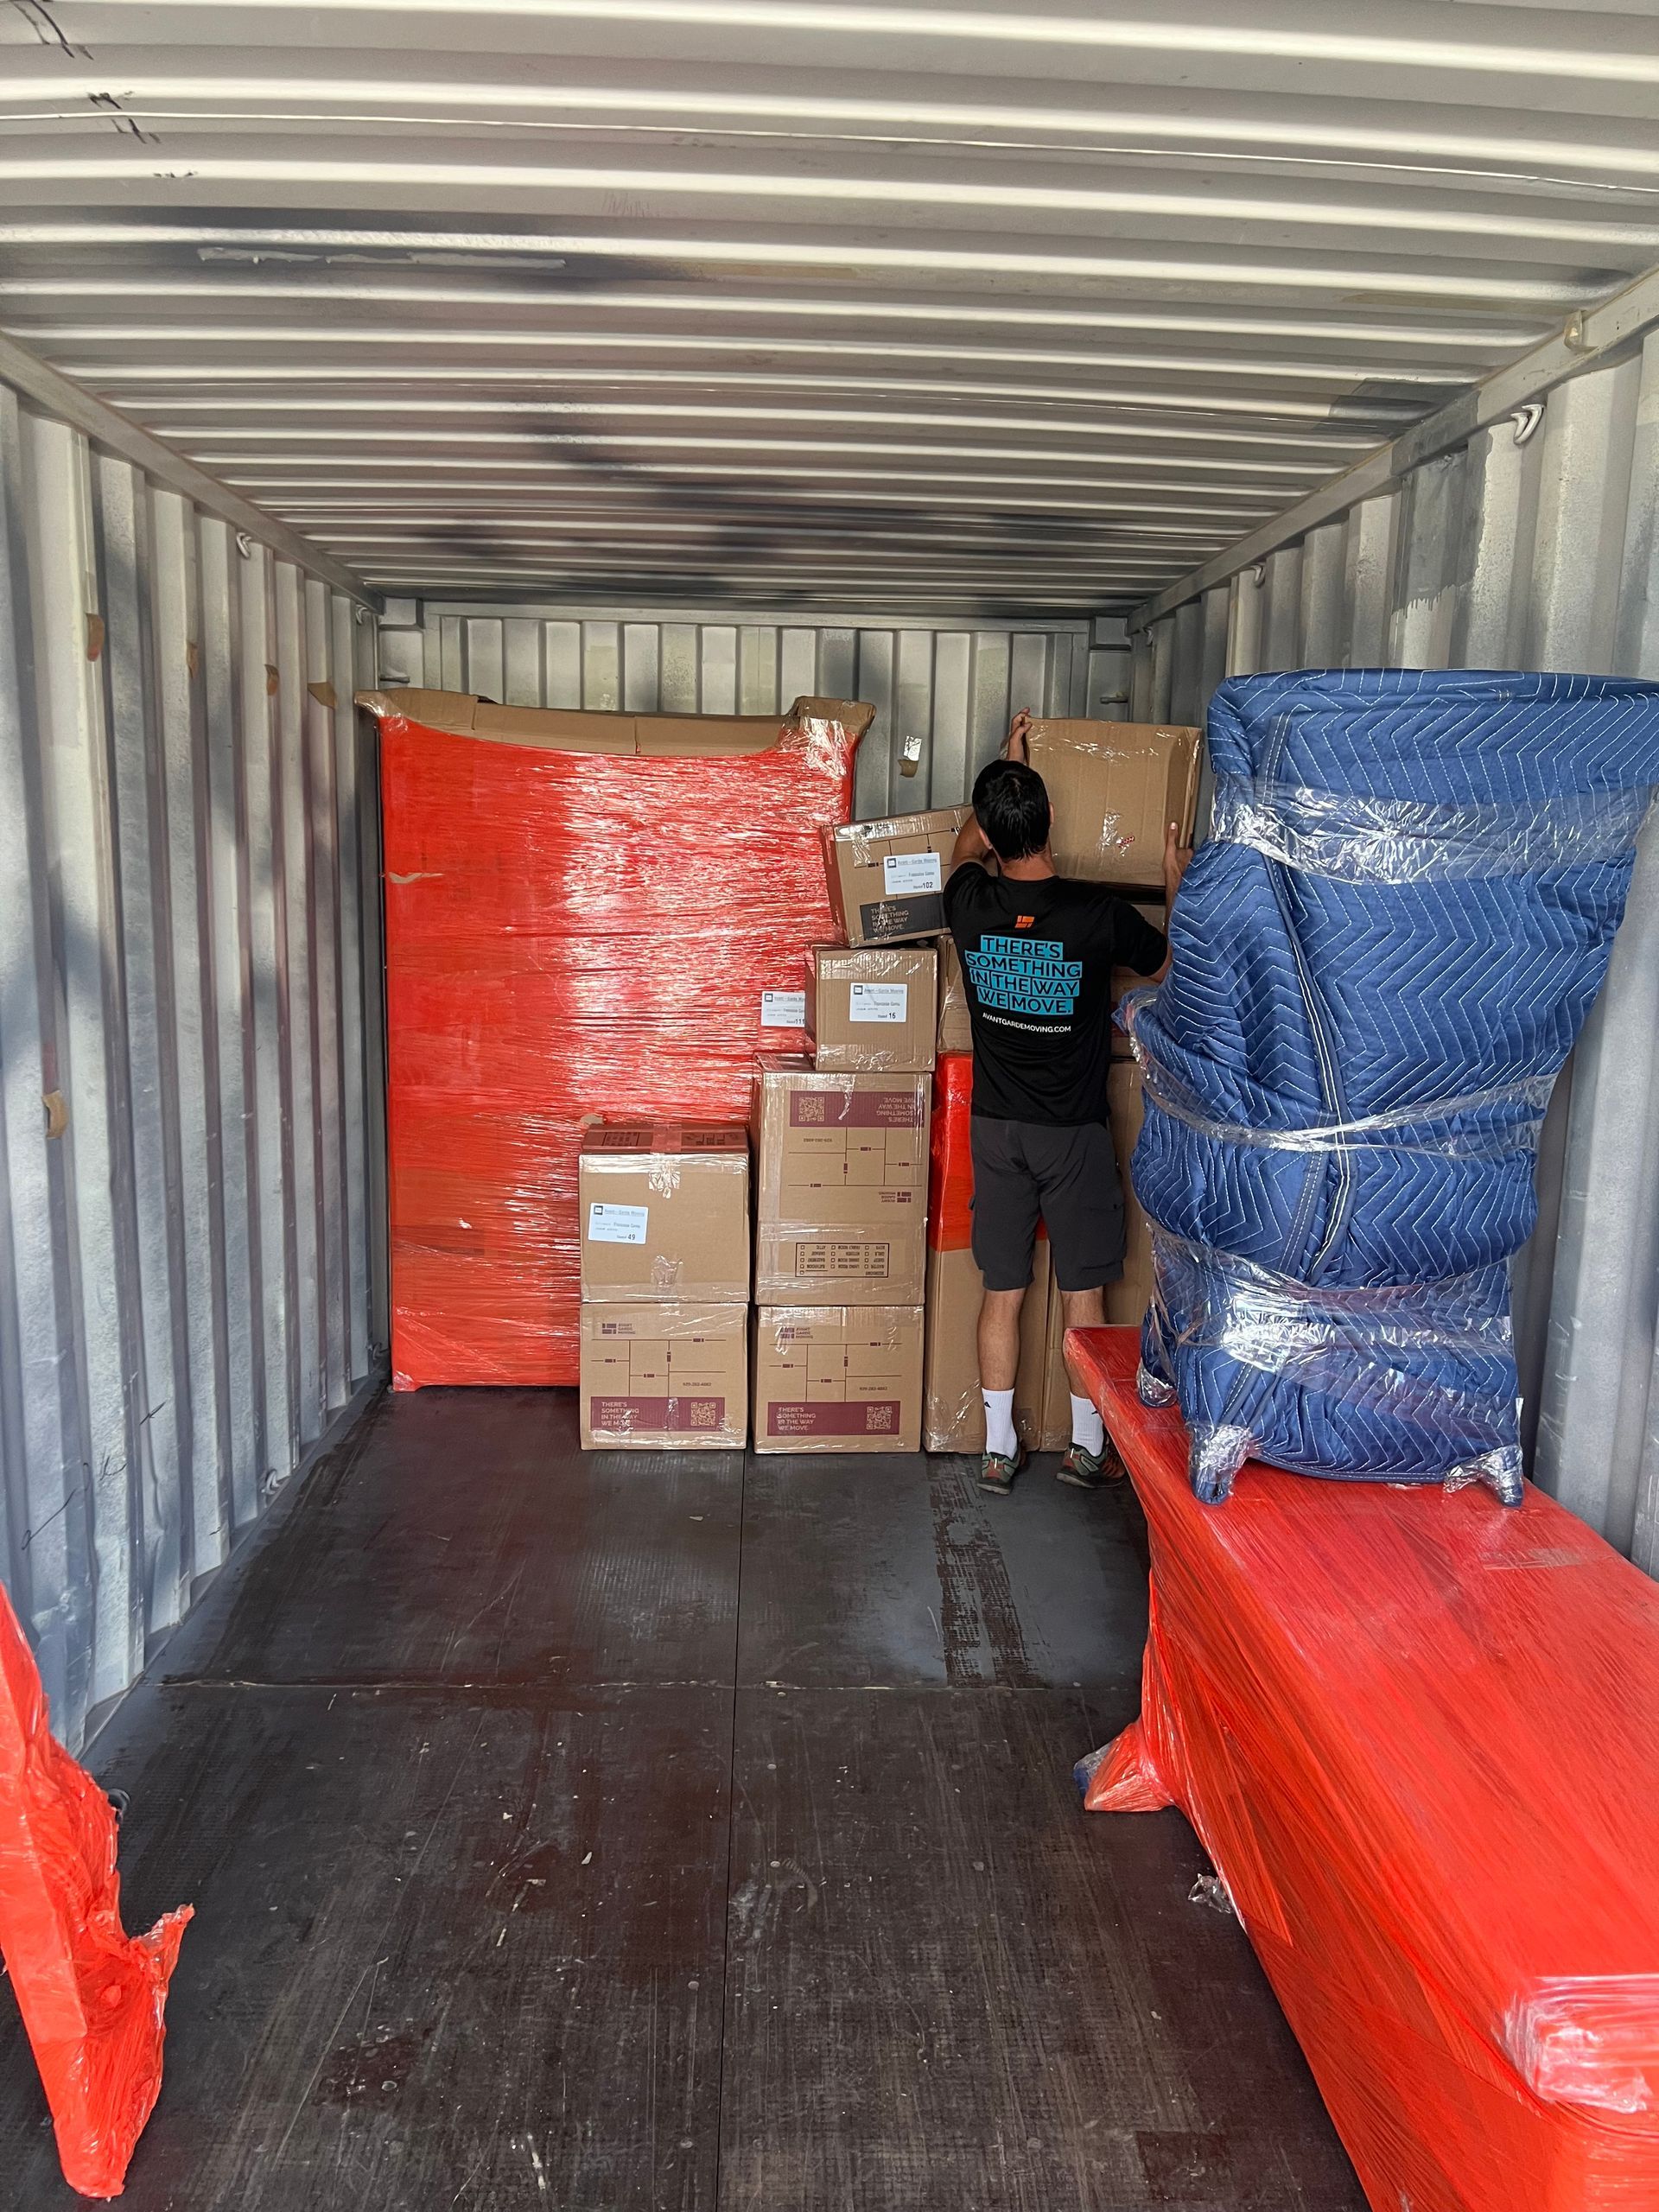 mover stacking up furniture in a moving pod (container) getting ready to be shipped overseas